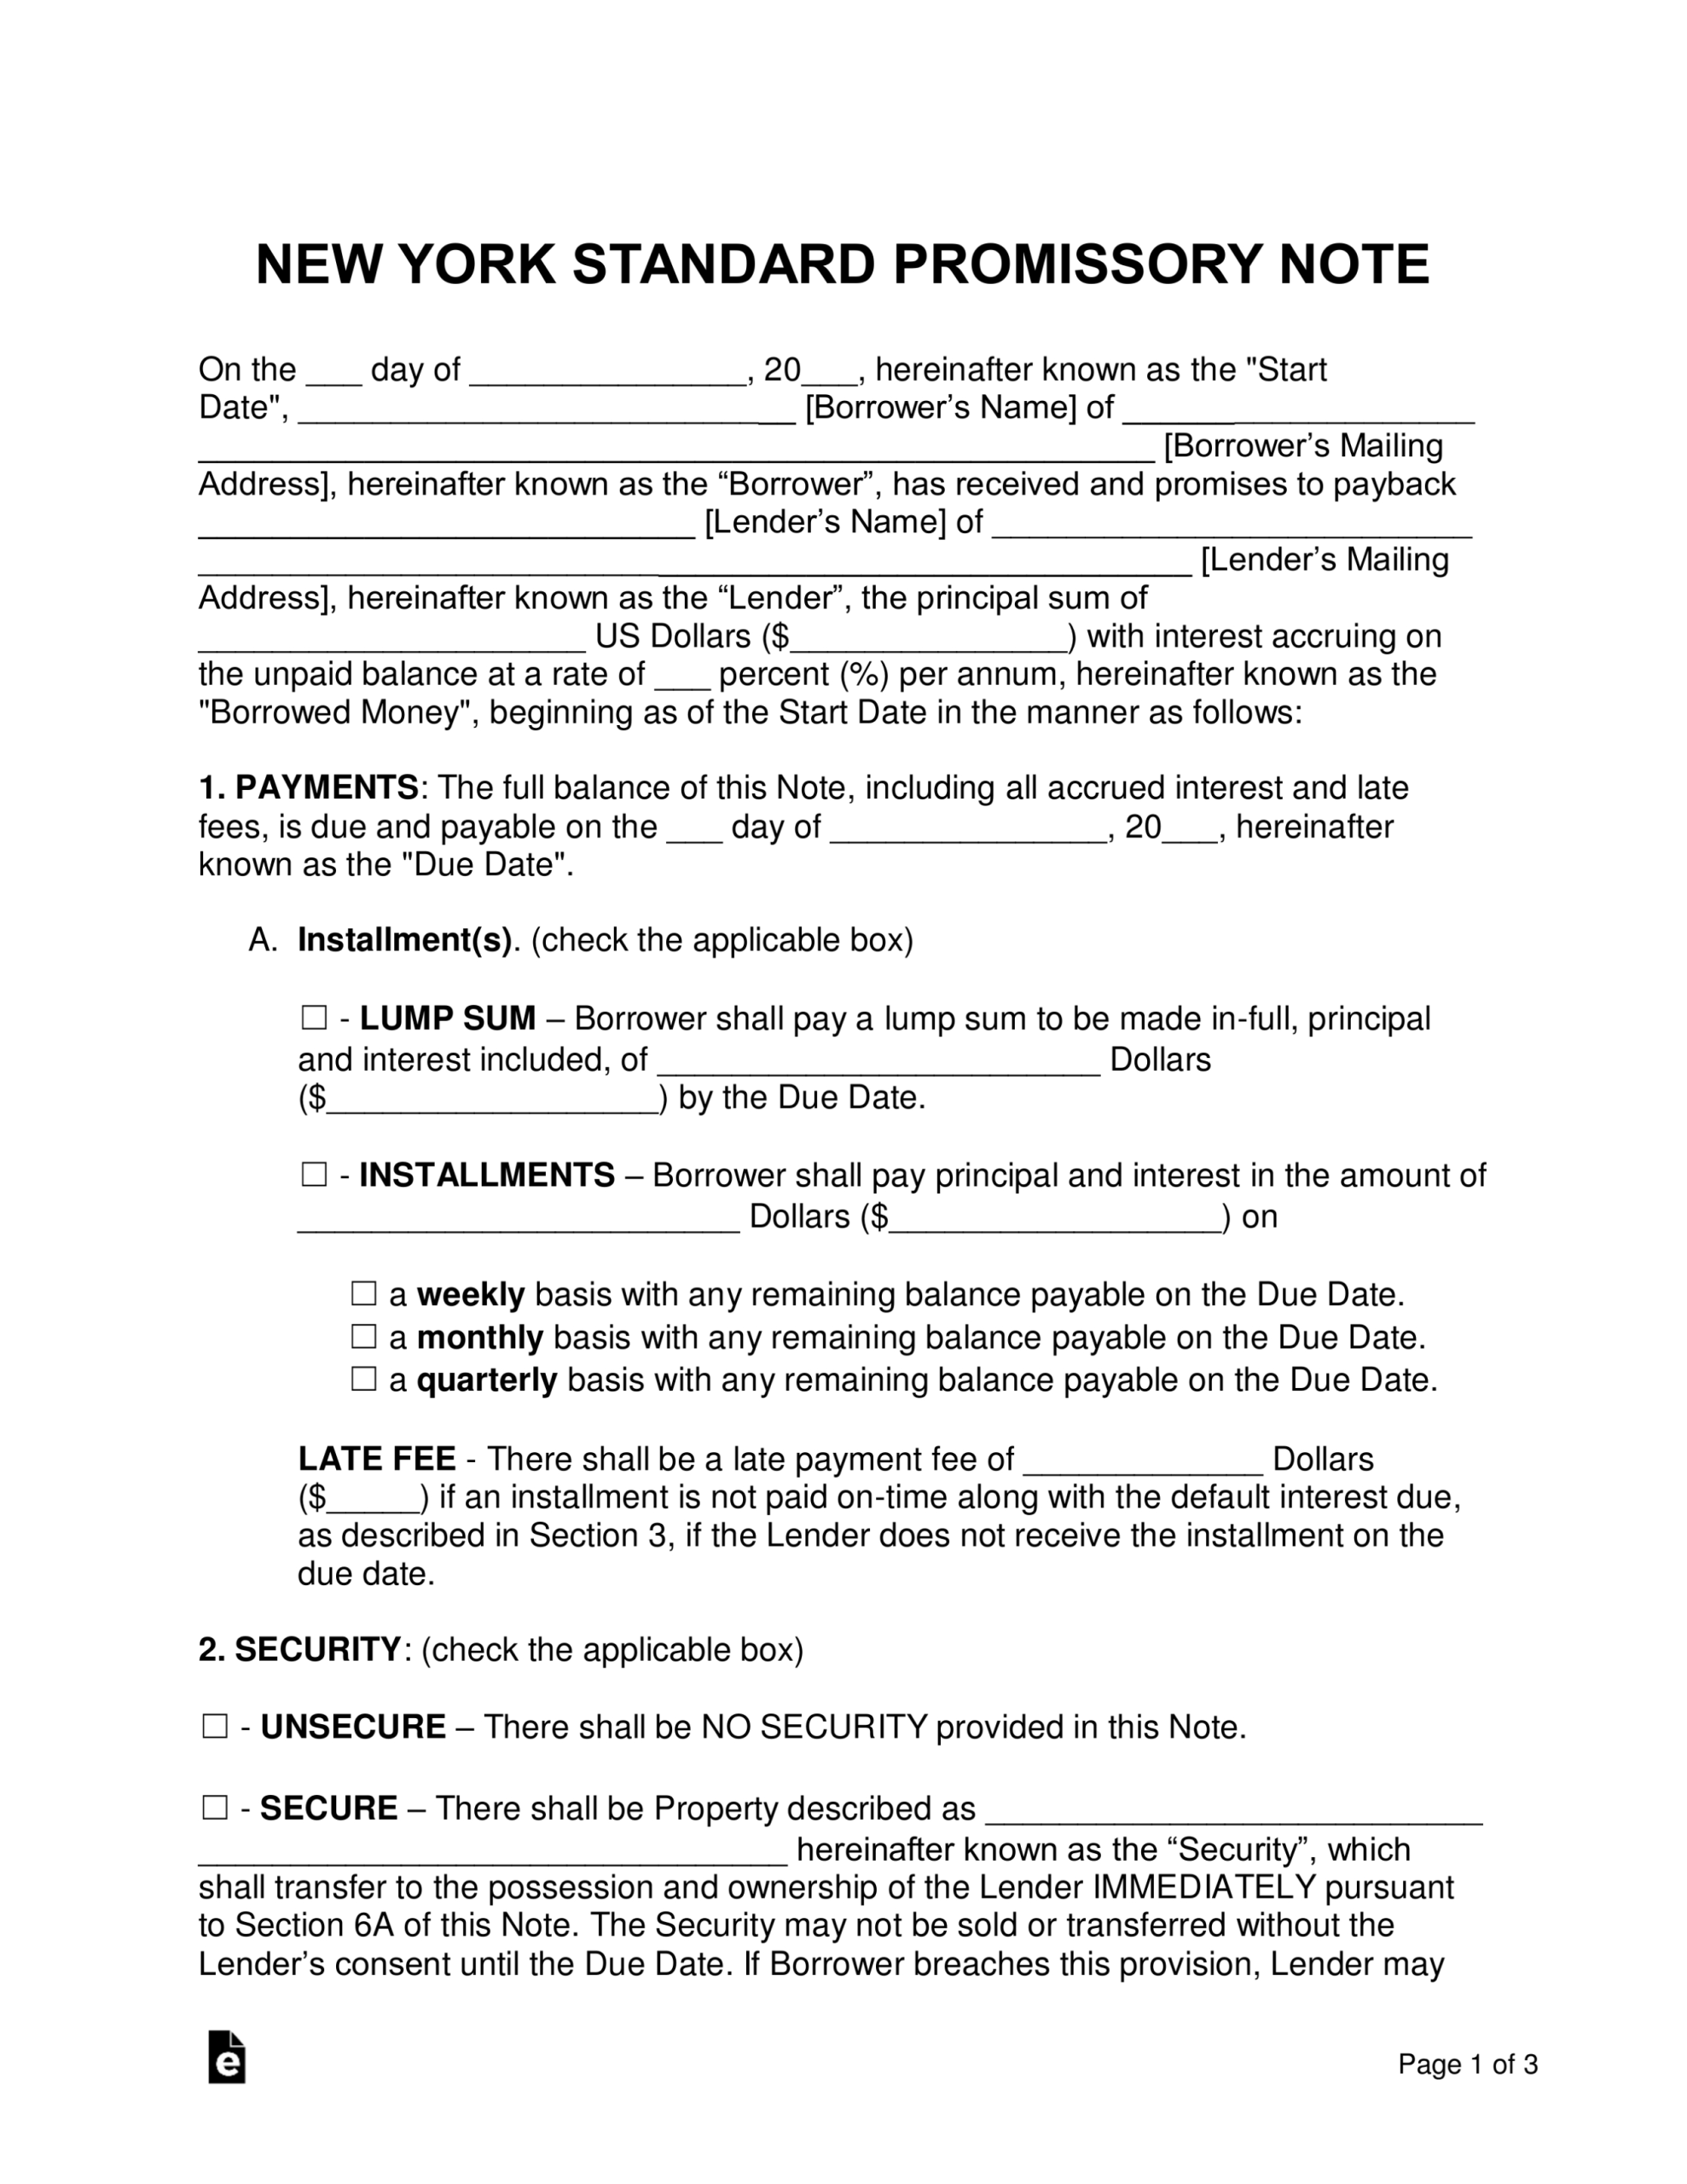 Free New York Promissory Note Templates - Word | Pdf - Eforms within Promissory Notes Templates